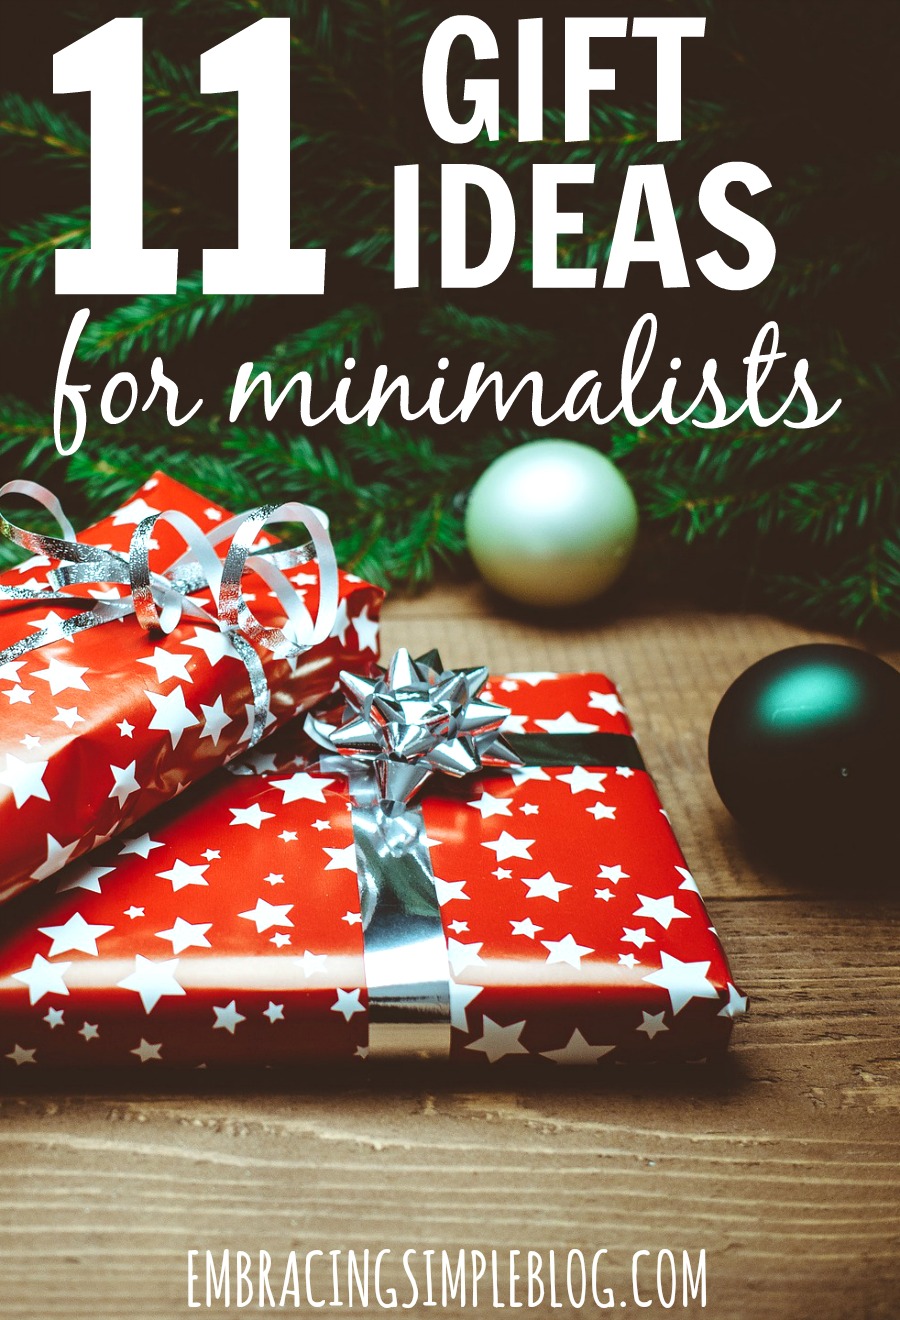 Tired of giving the same old gifts that just end up as clutter around the recipient's home? Don't miss these 11 gift ideas for minimalists - even non-minimalists will appreciate these clutter-free and thoughtful gift ideas!